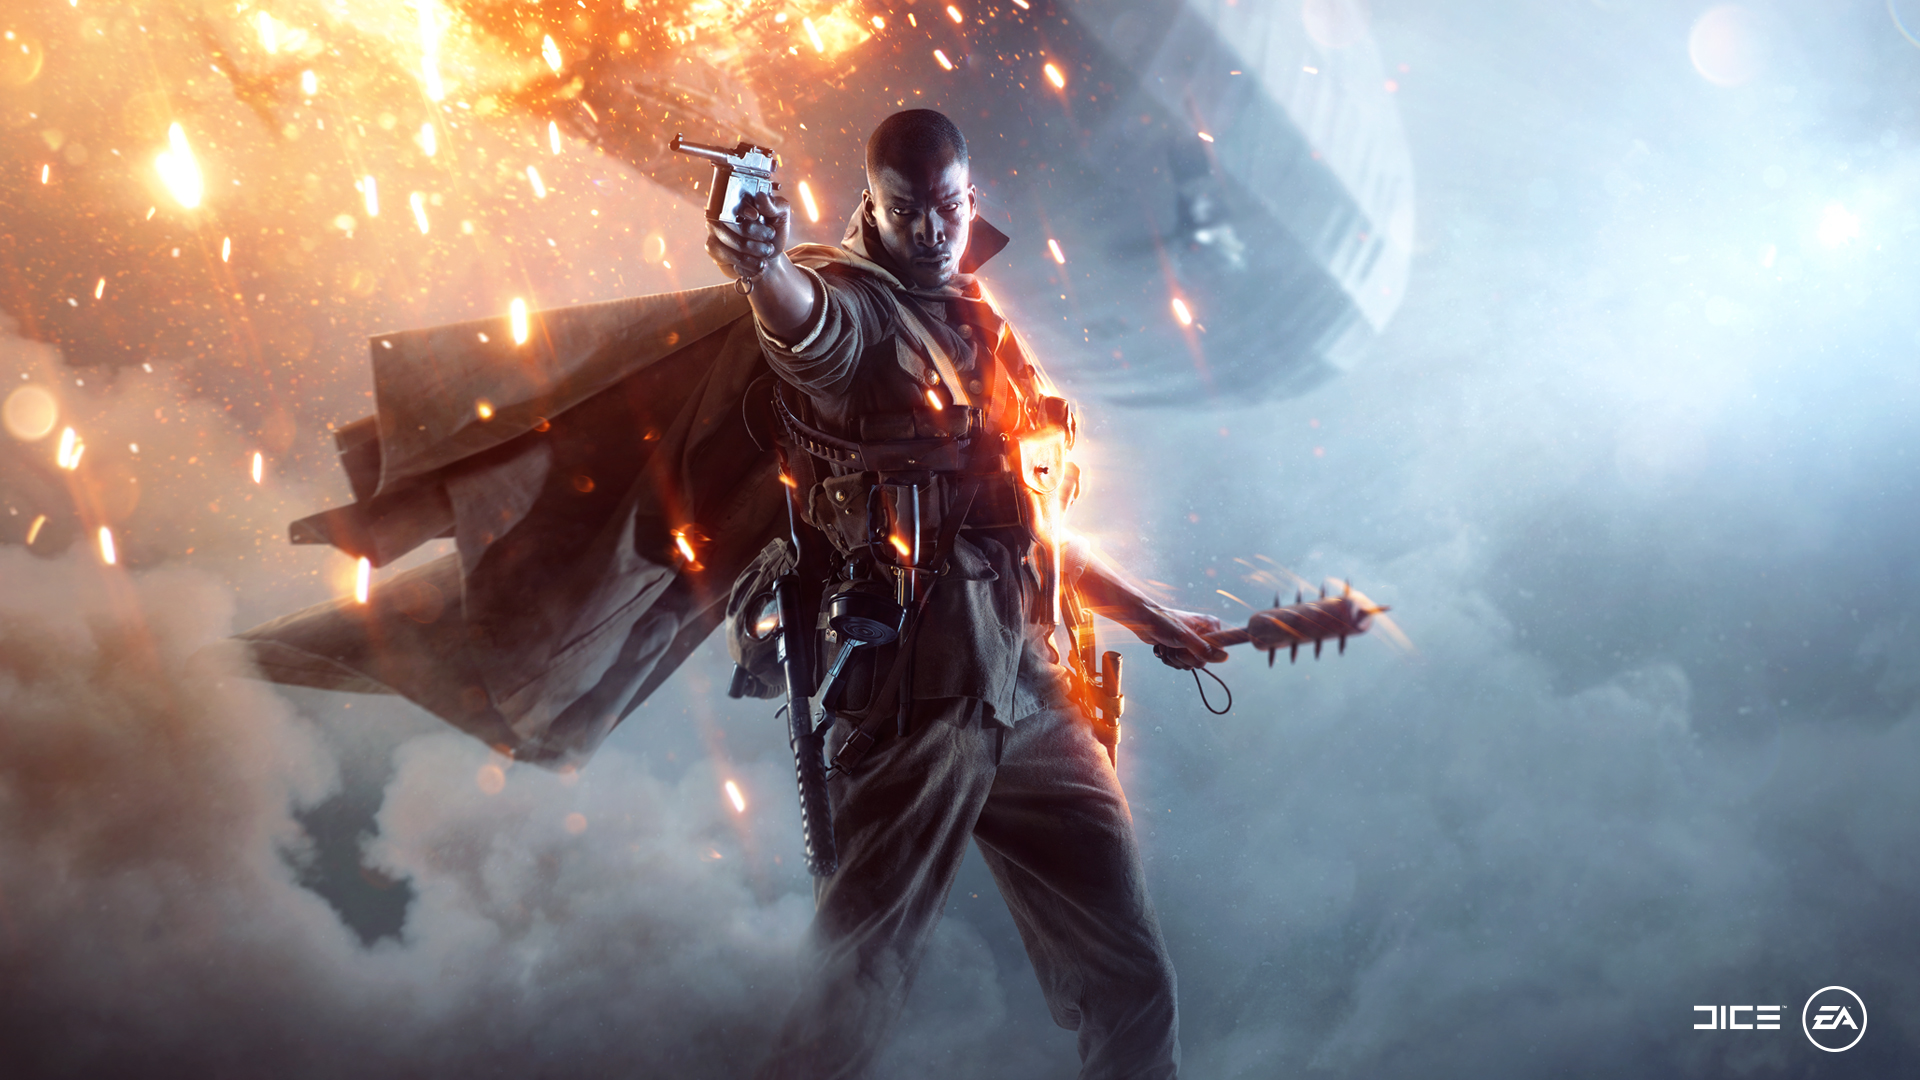 Battlefield 1 Wallpapers for PC, Mobile, and Tablets